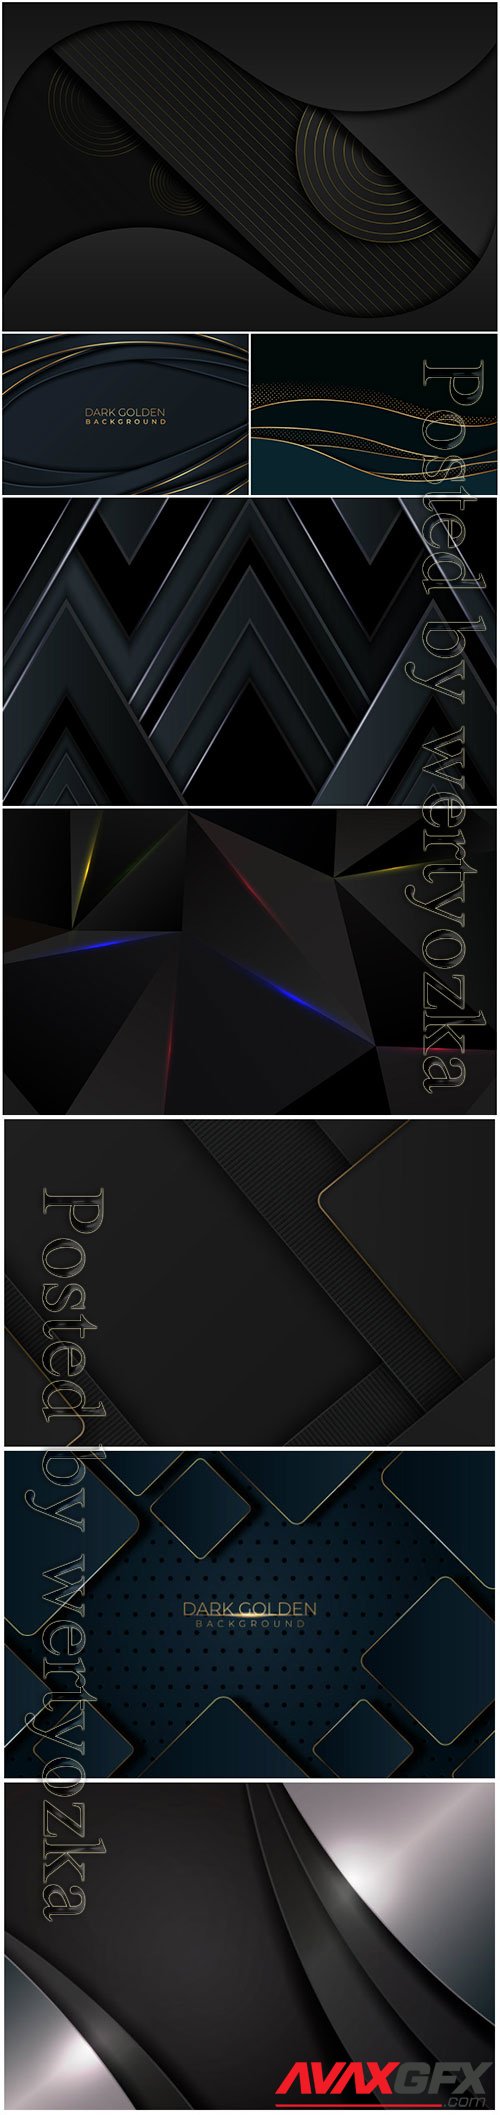 Luxury abstract backgrounds in vector # 9